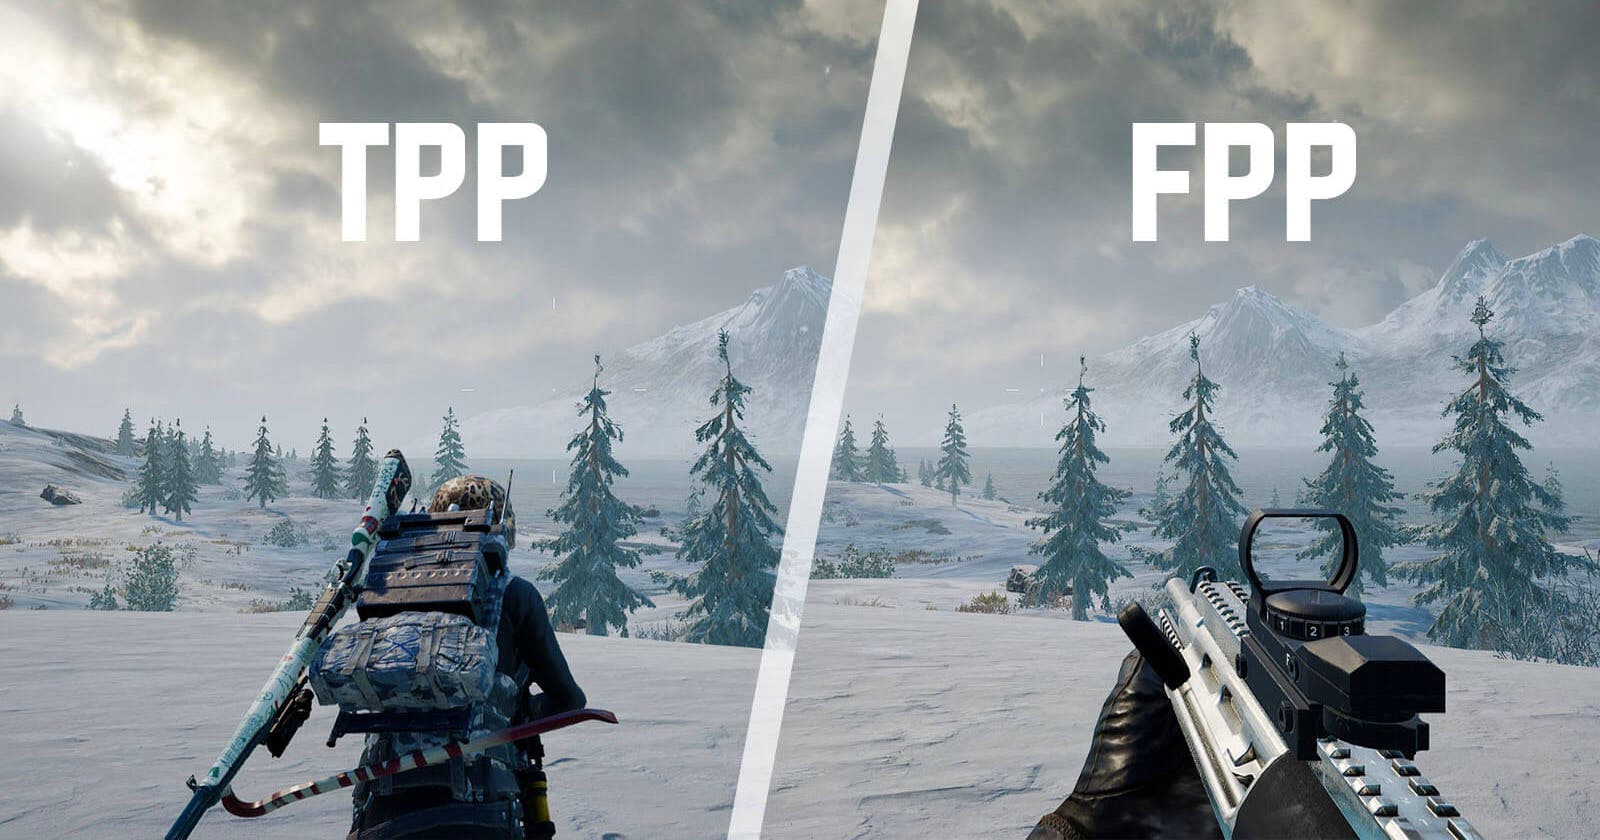 FPP or TPP